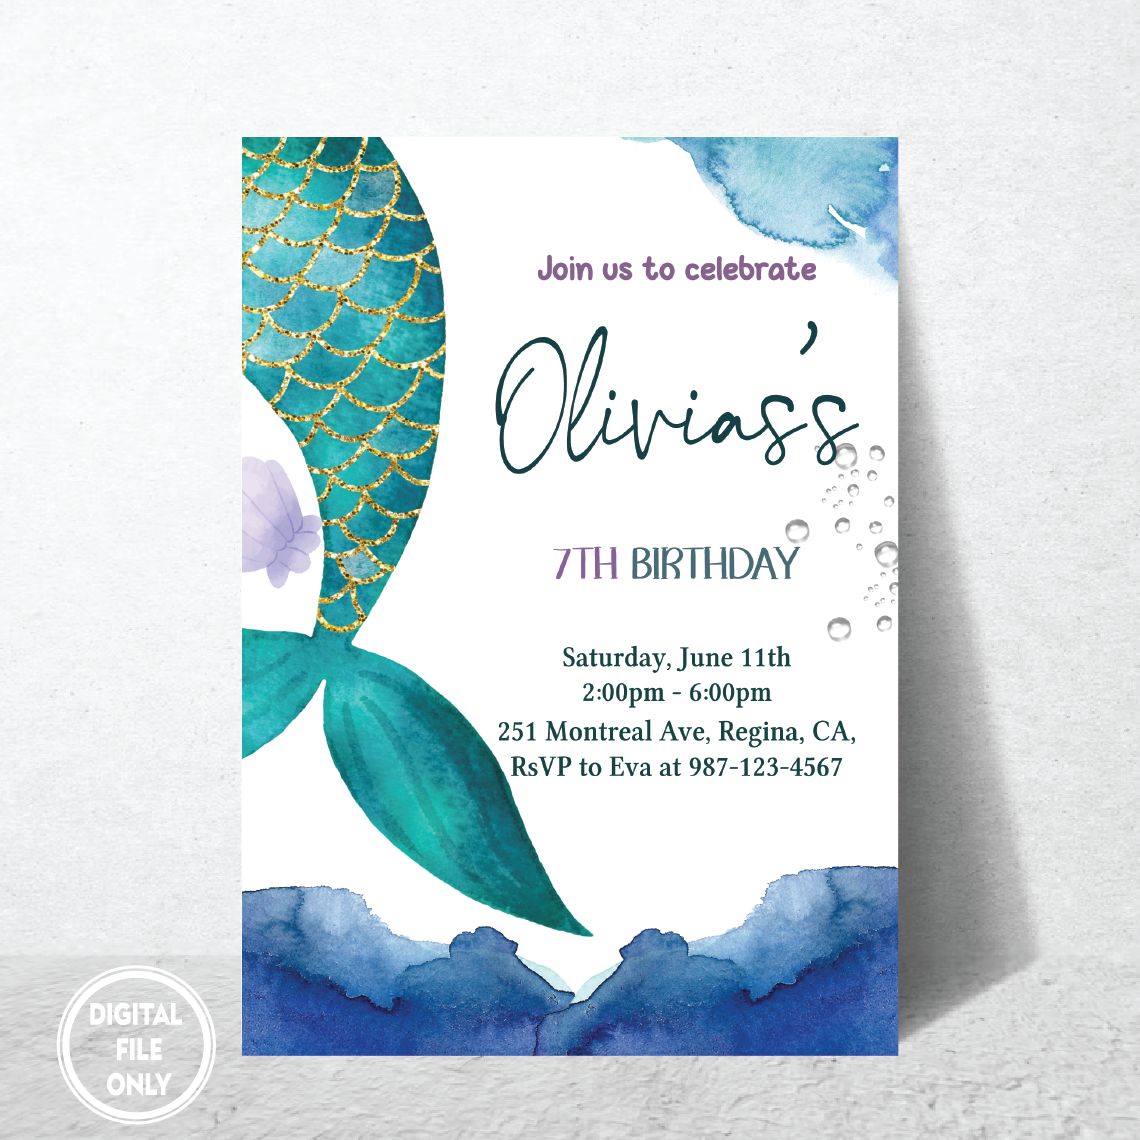 Personalized File Mermaid Birthday Invitation Under the Sea Little Teal Mermaid Birthday Invitation Download, Digital File PNG File Only